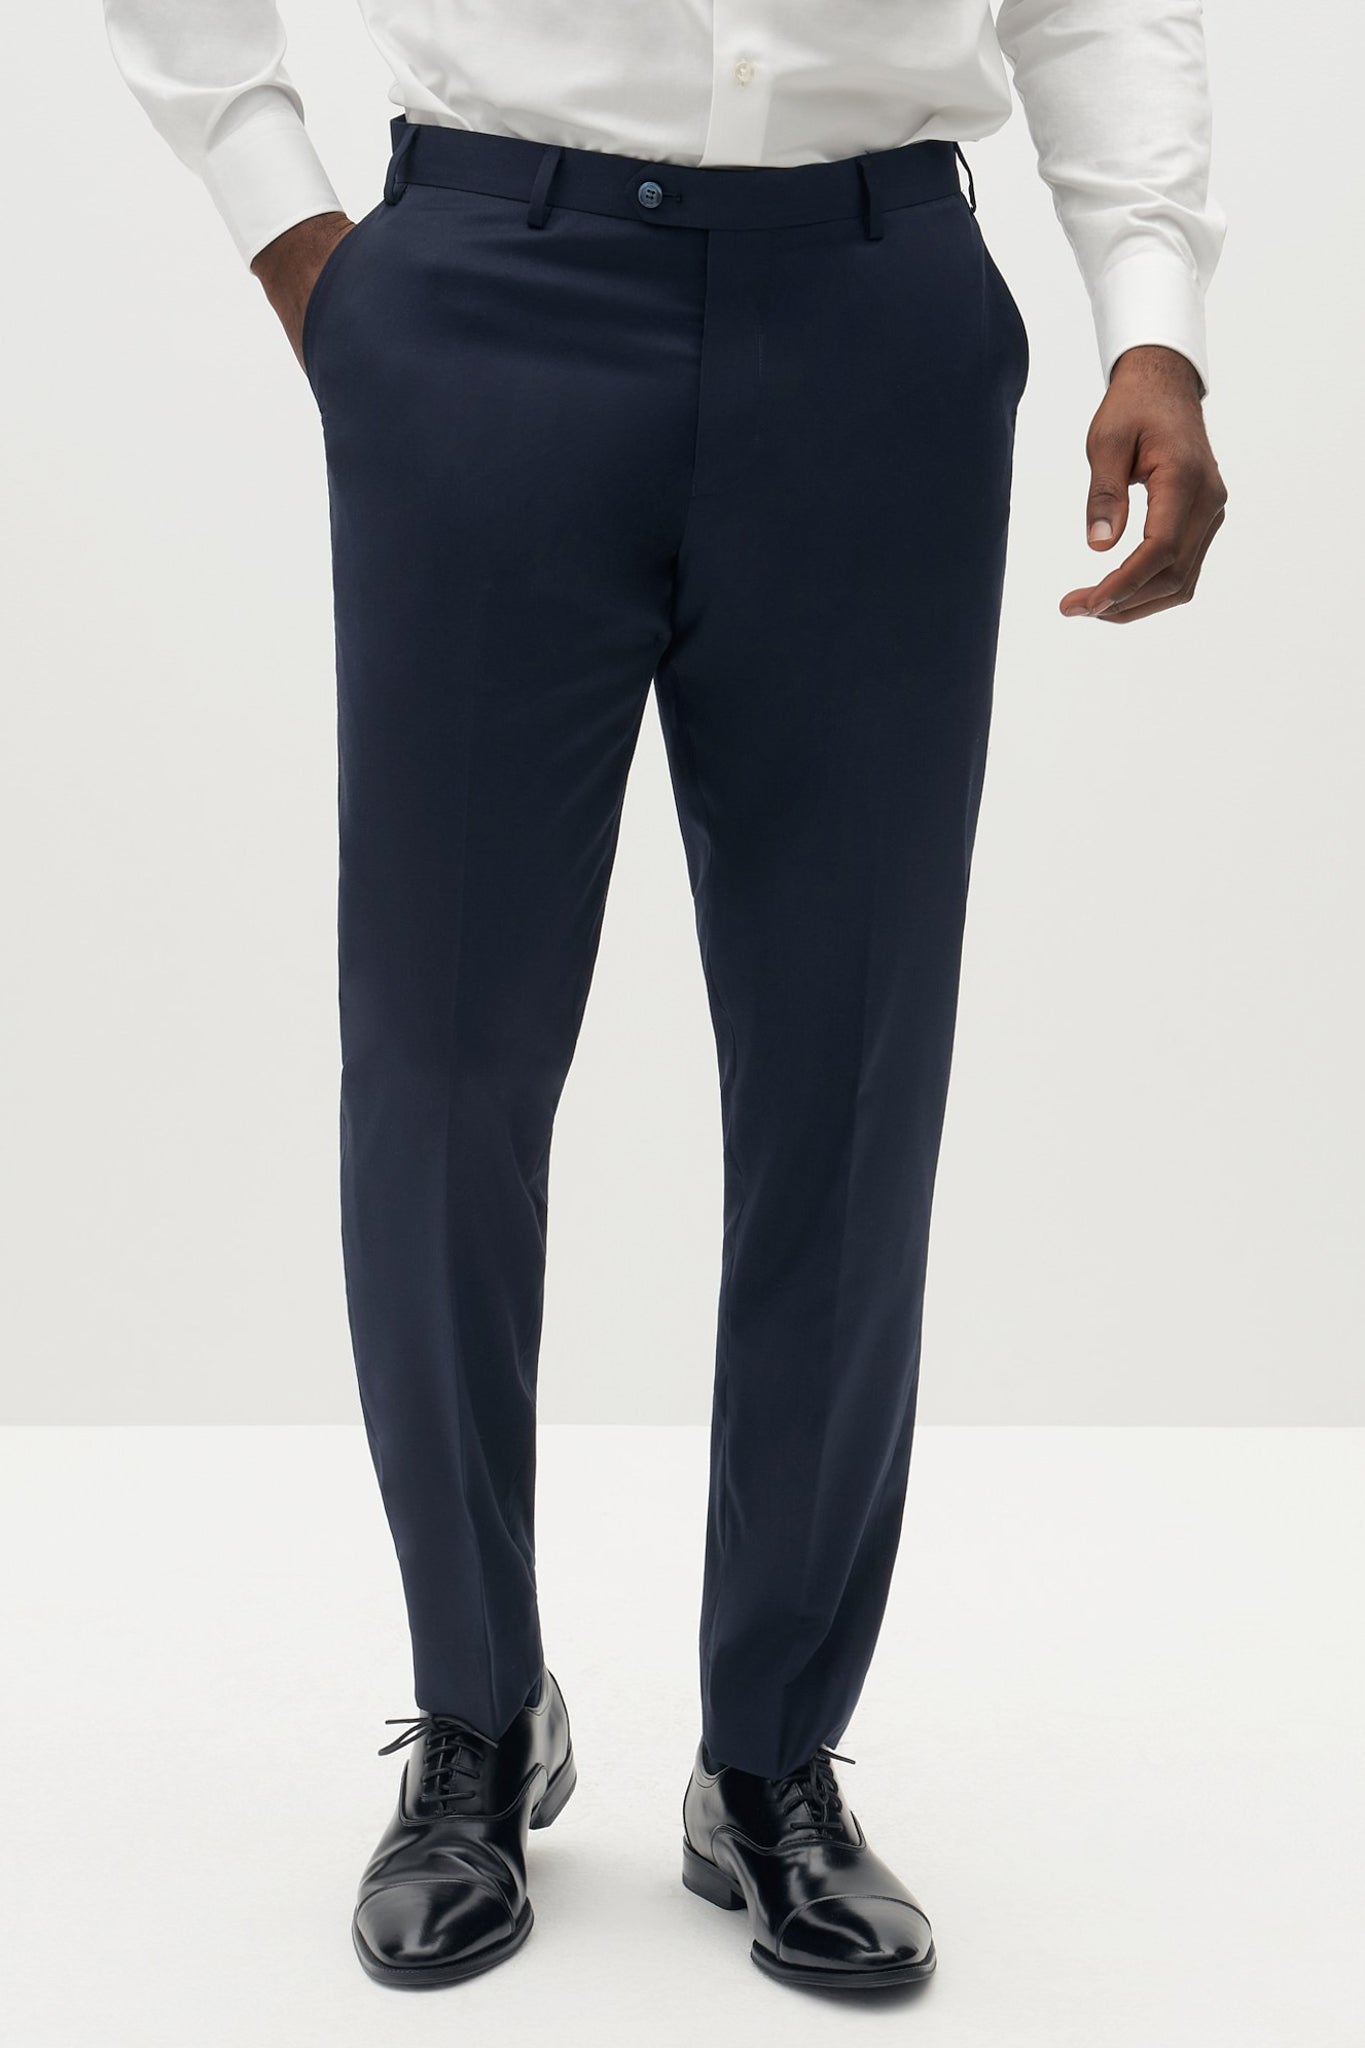 I understand & wish to continue  Mens navy dress pants, Blue